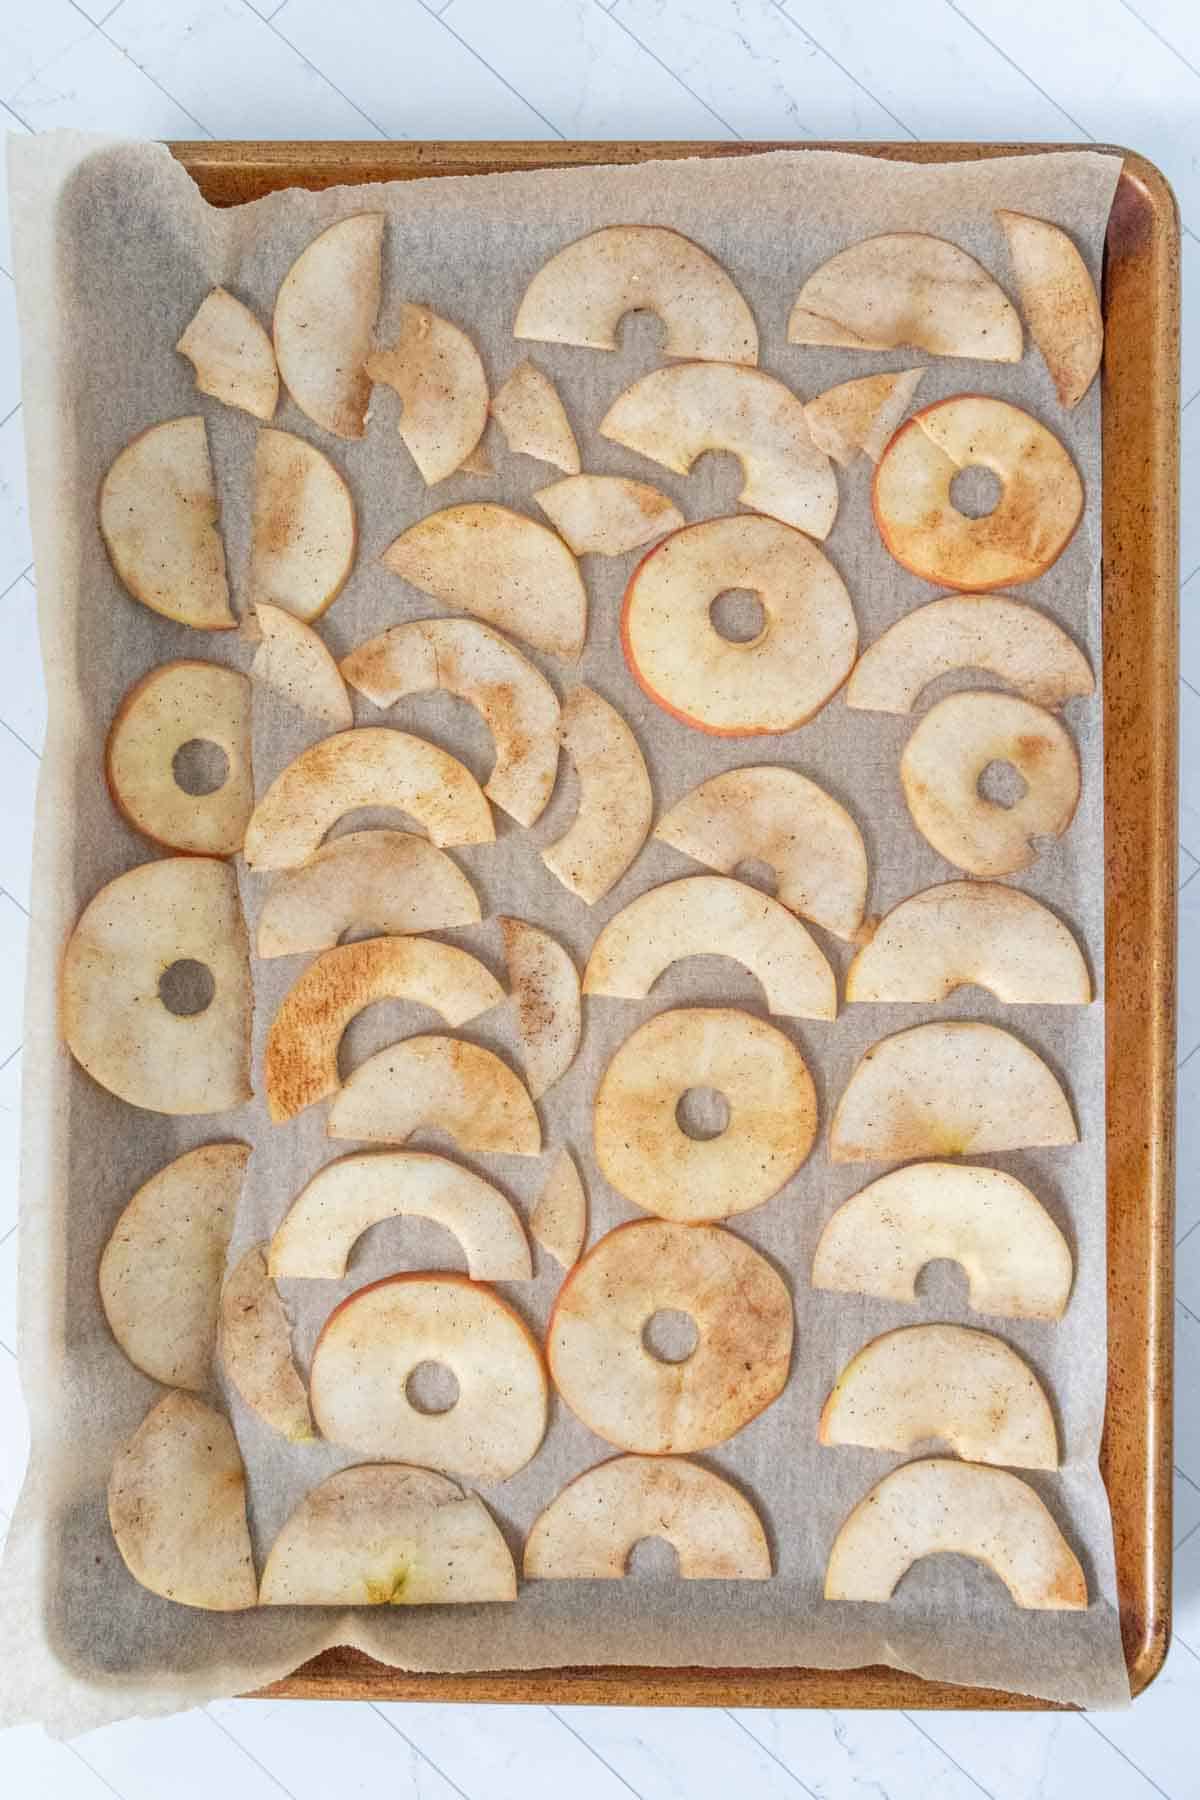 Apple slices on a baking sheet.